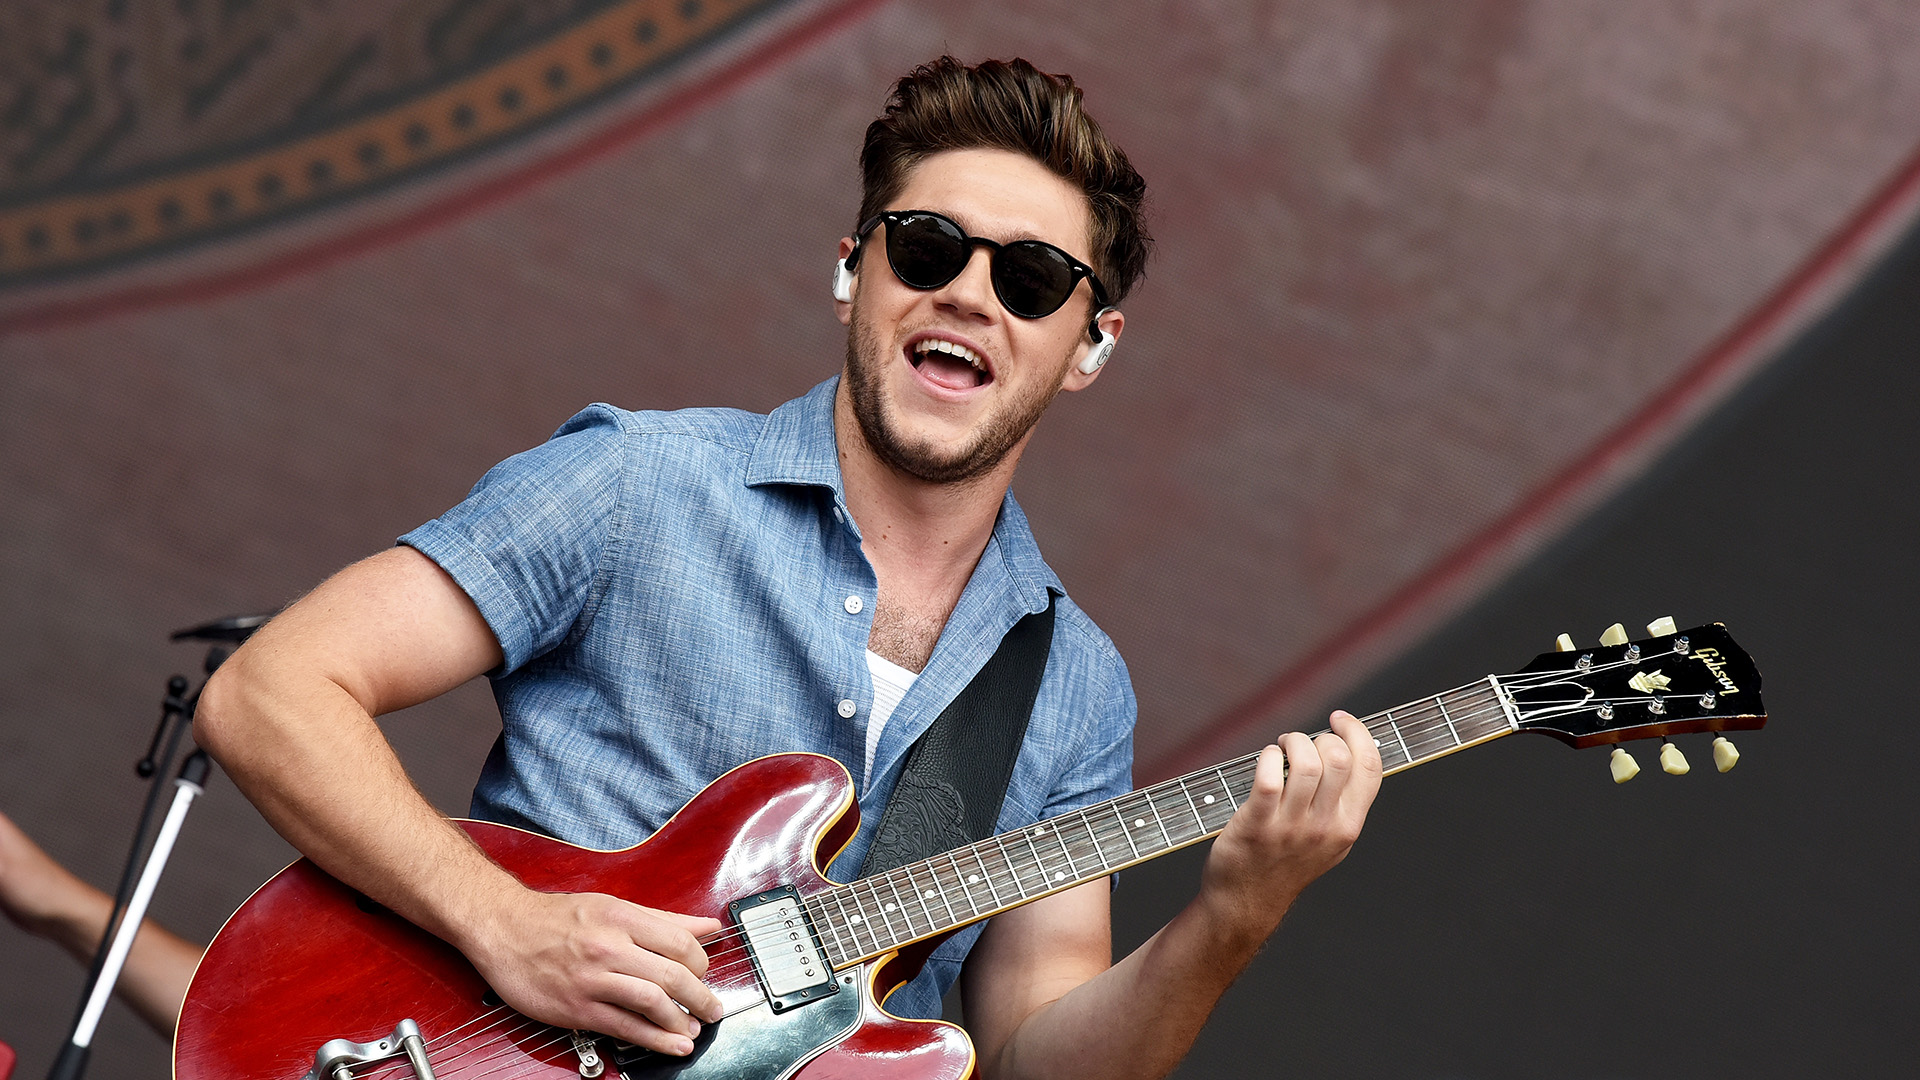 Niall Horan performs during day 2 of BBC Radio 1's Biggest Weekend 2018 held at Singleton Park on May 27, 2018 in Swansea, Wales.